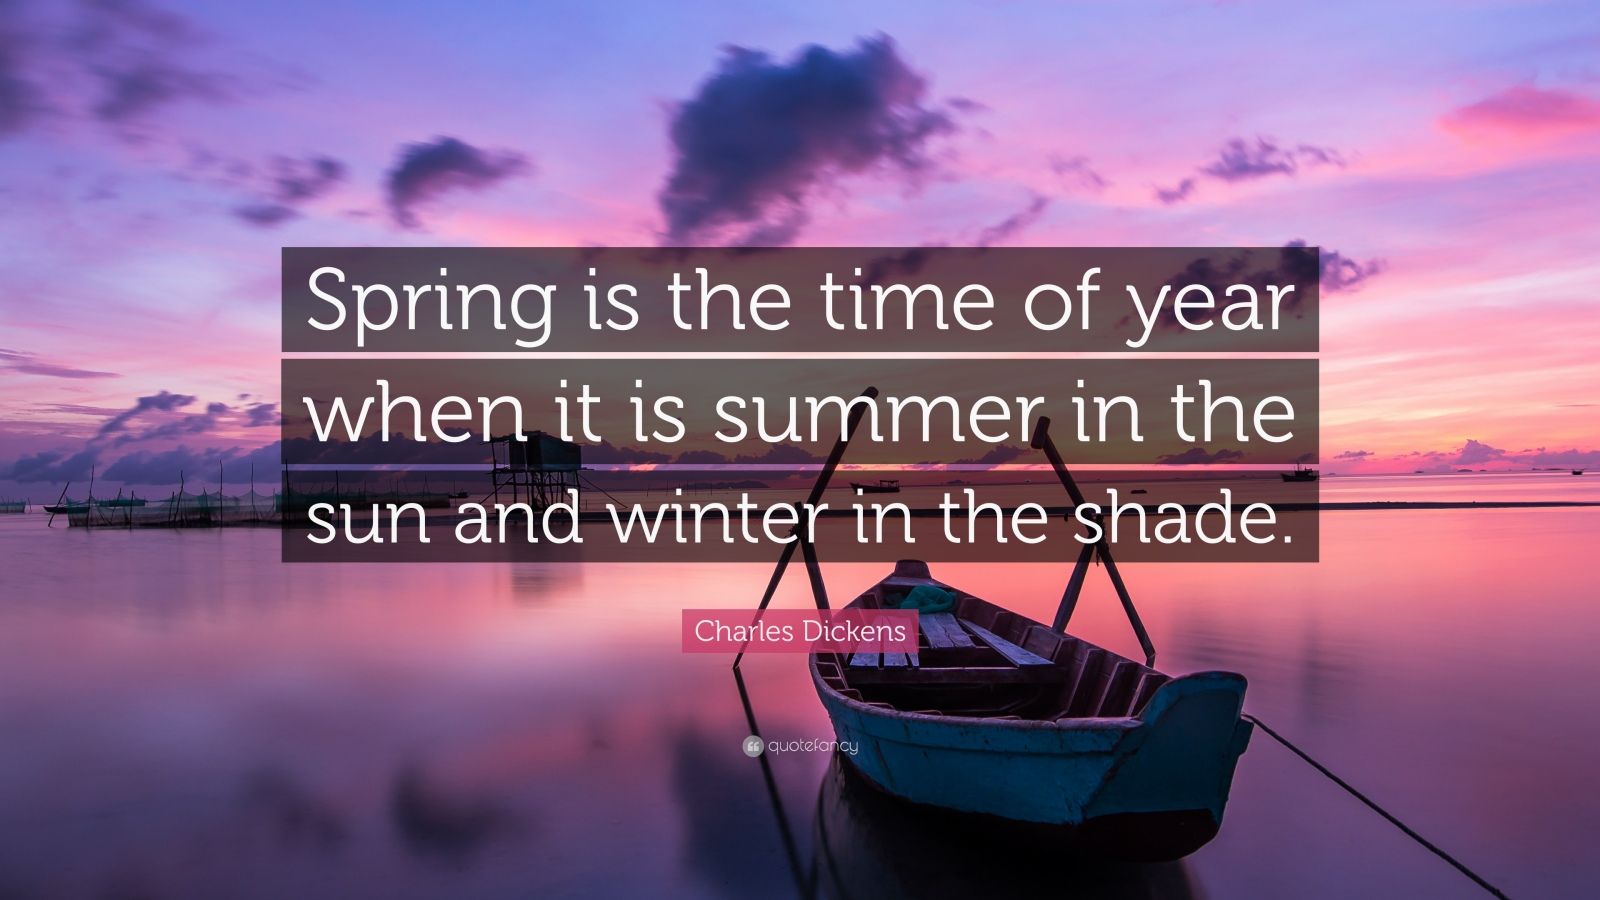 Charles Dickens Quote: “Spring is the time of year when it is summer in